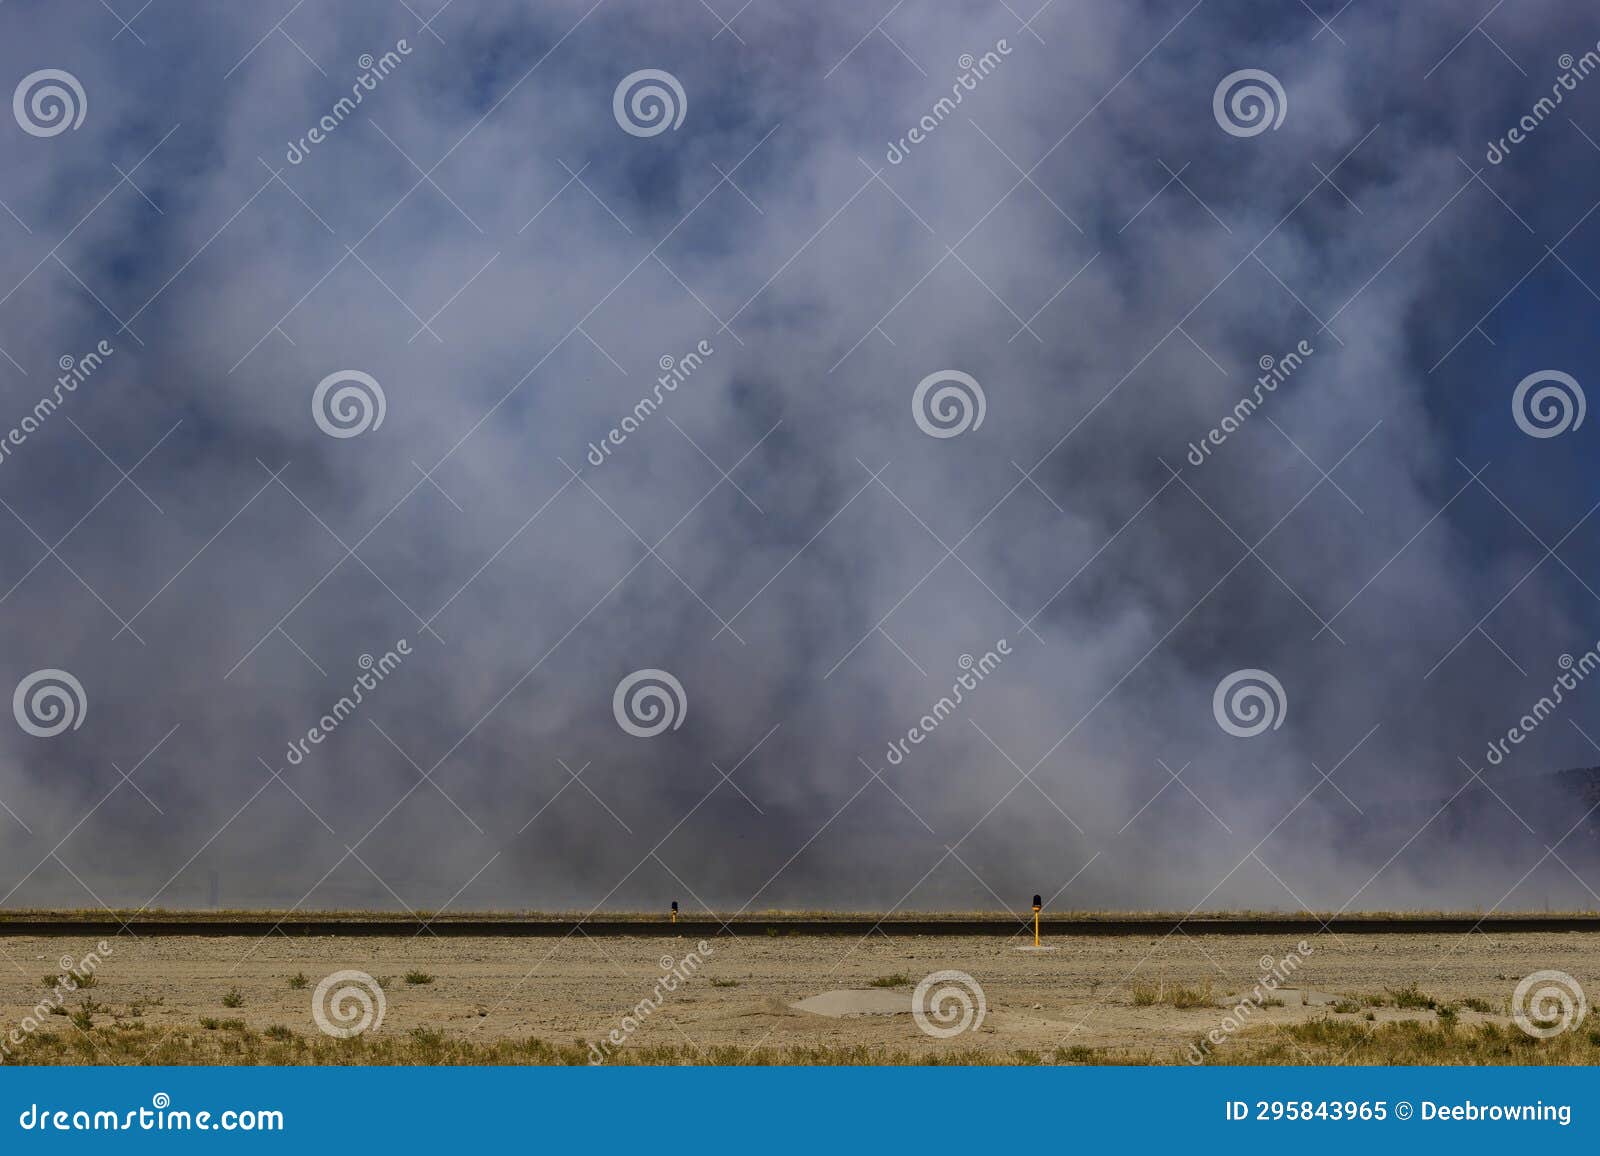 smoke over runway at stead airport in nevada, usa